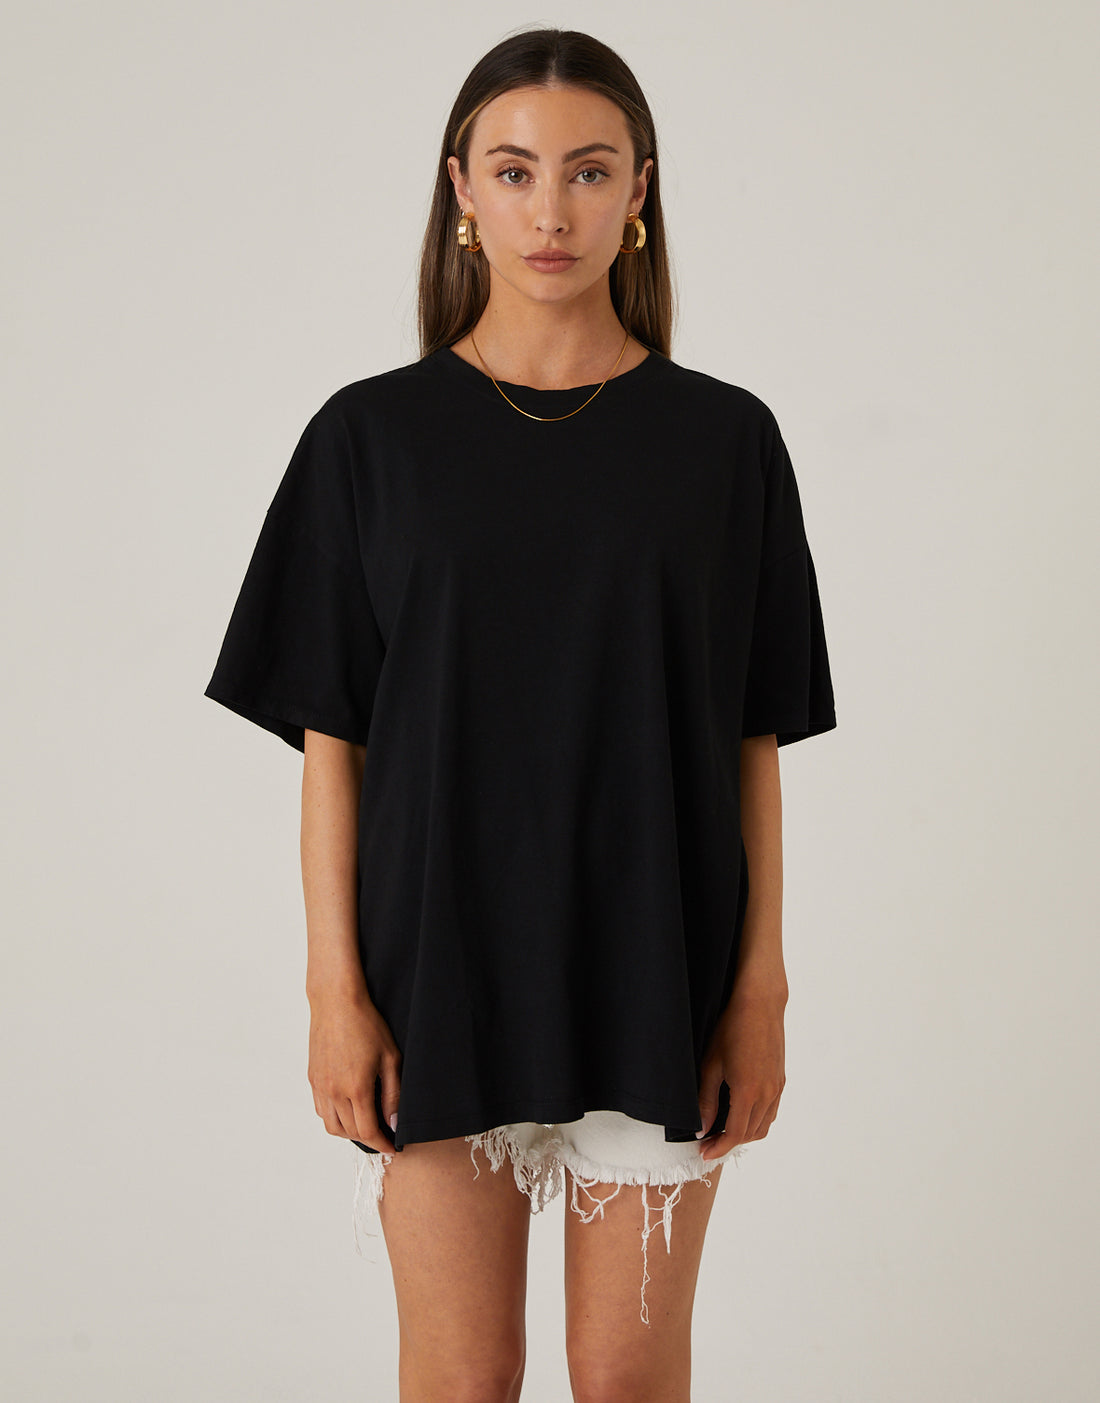 Comfy Oversized Tee Tops Black S/M -2020AVE